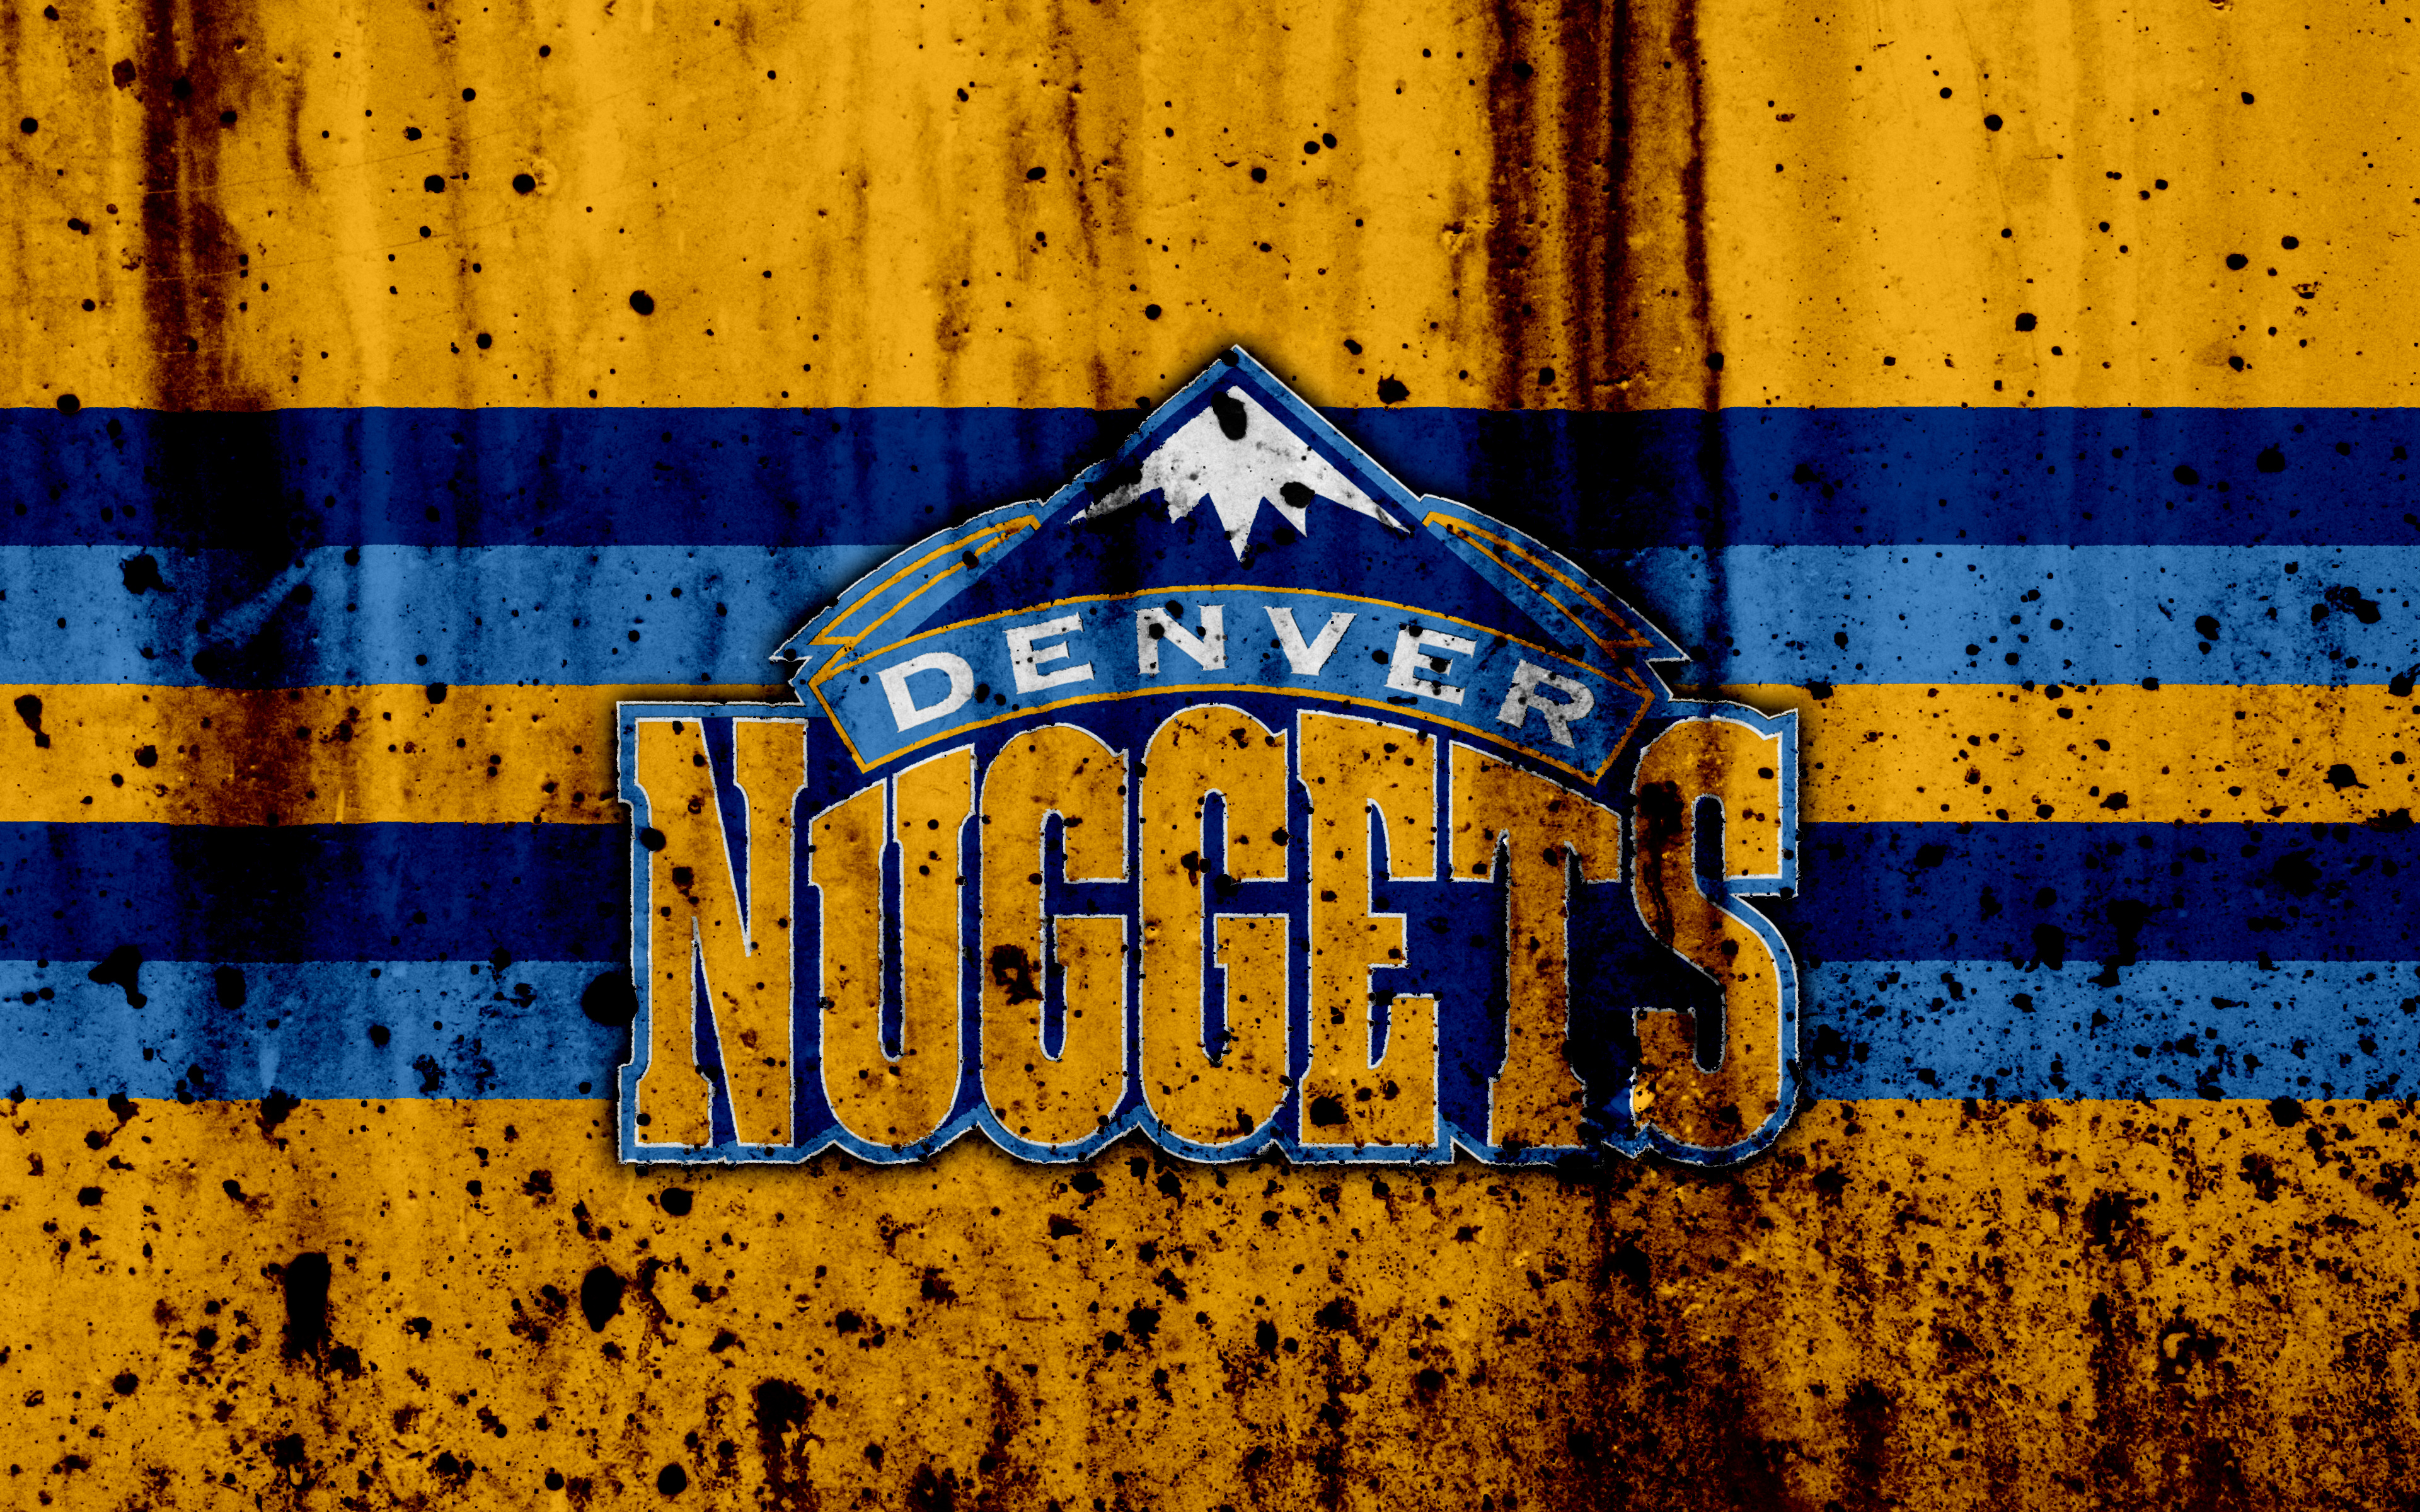 DENVER nuggets wallpaper by longlivebasketball  Download on ZEDGE  a6a0